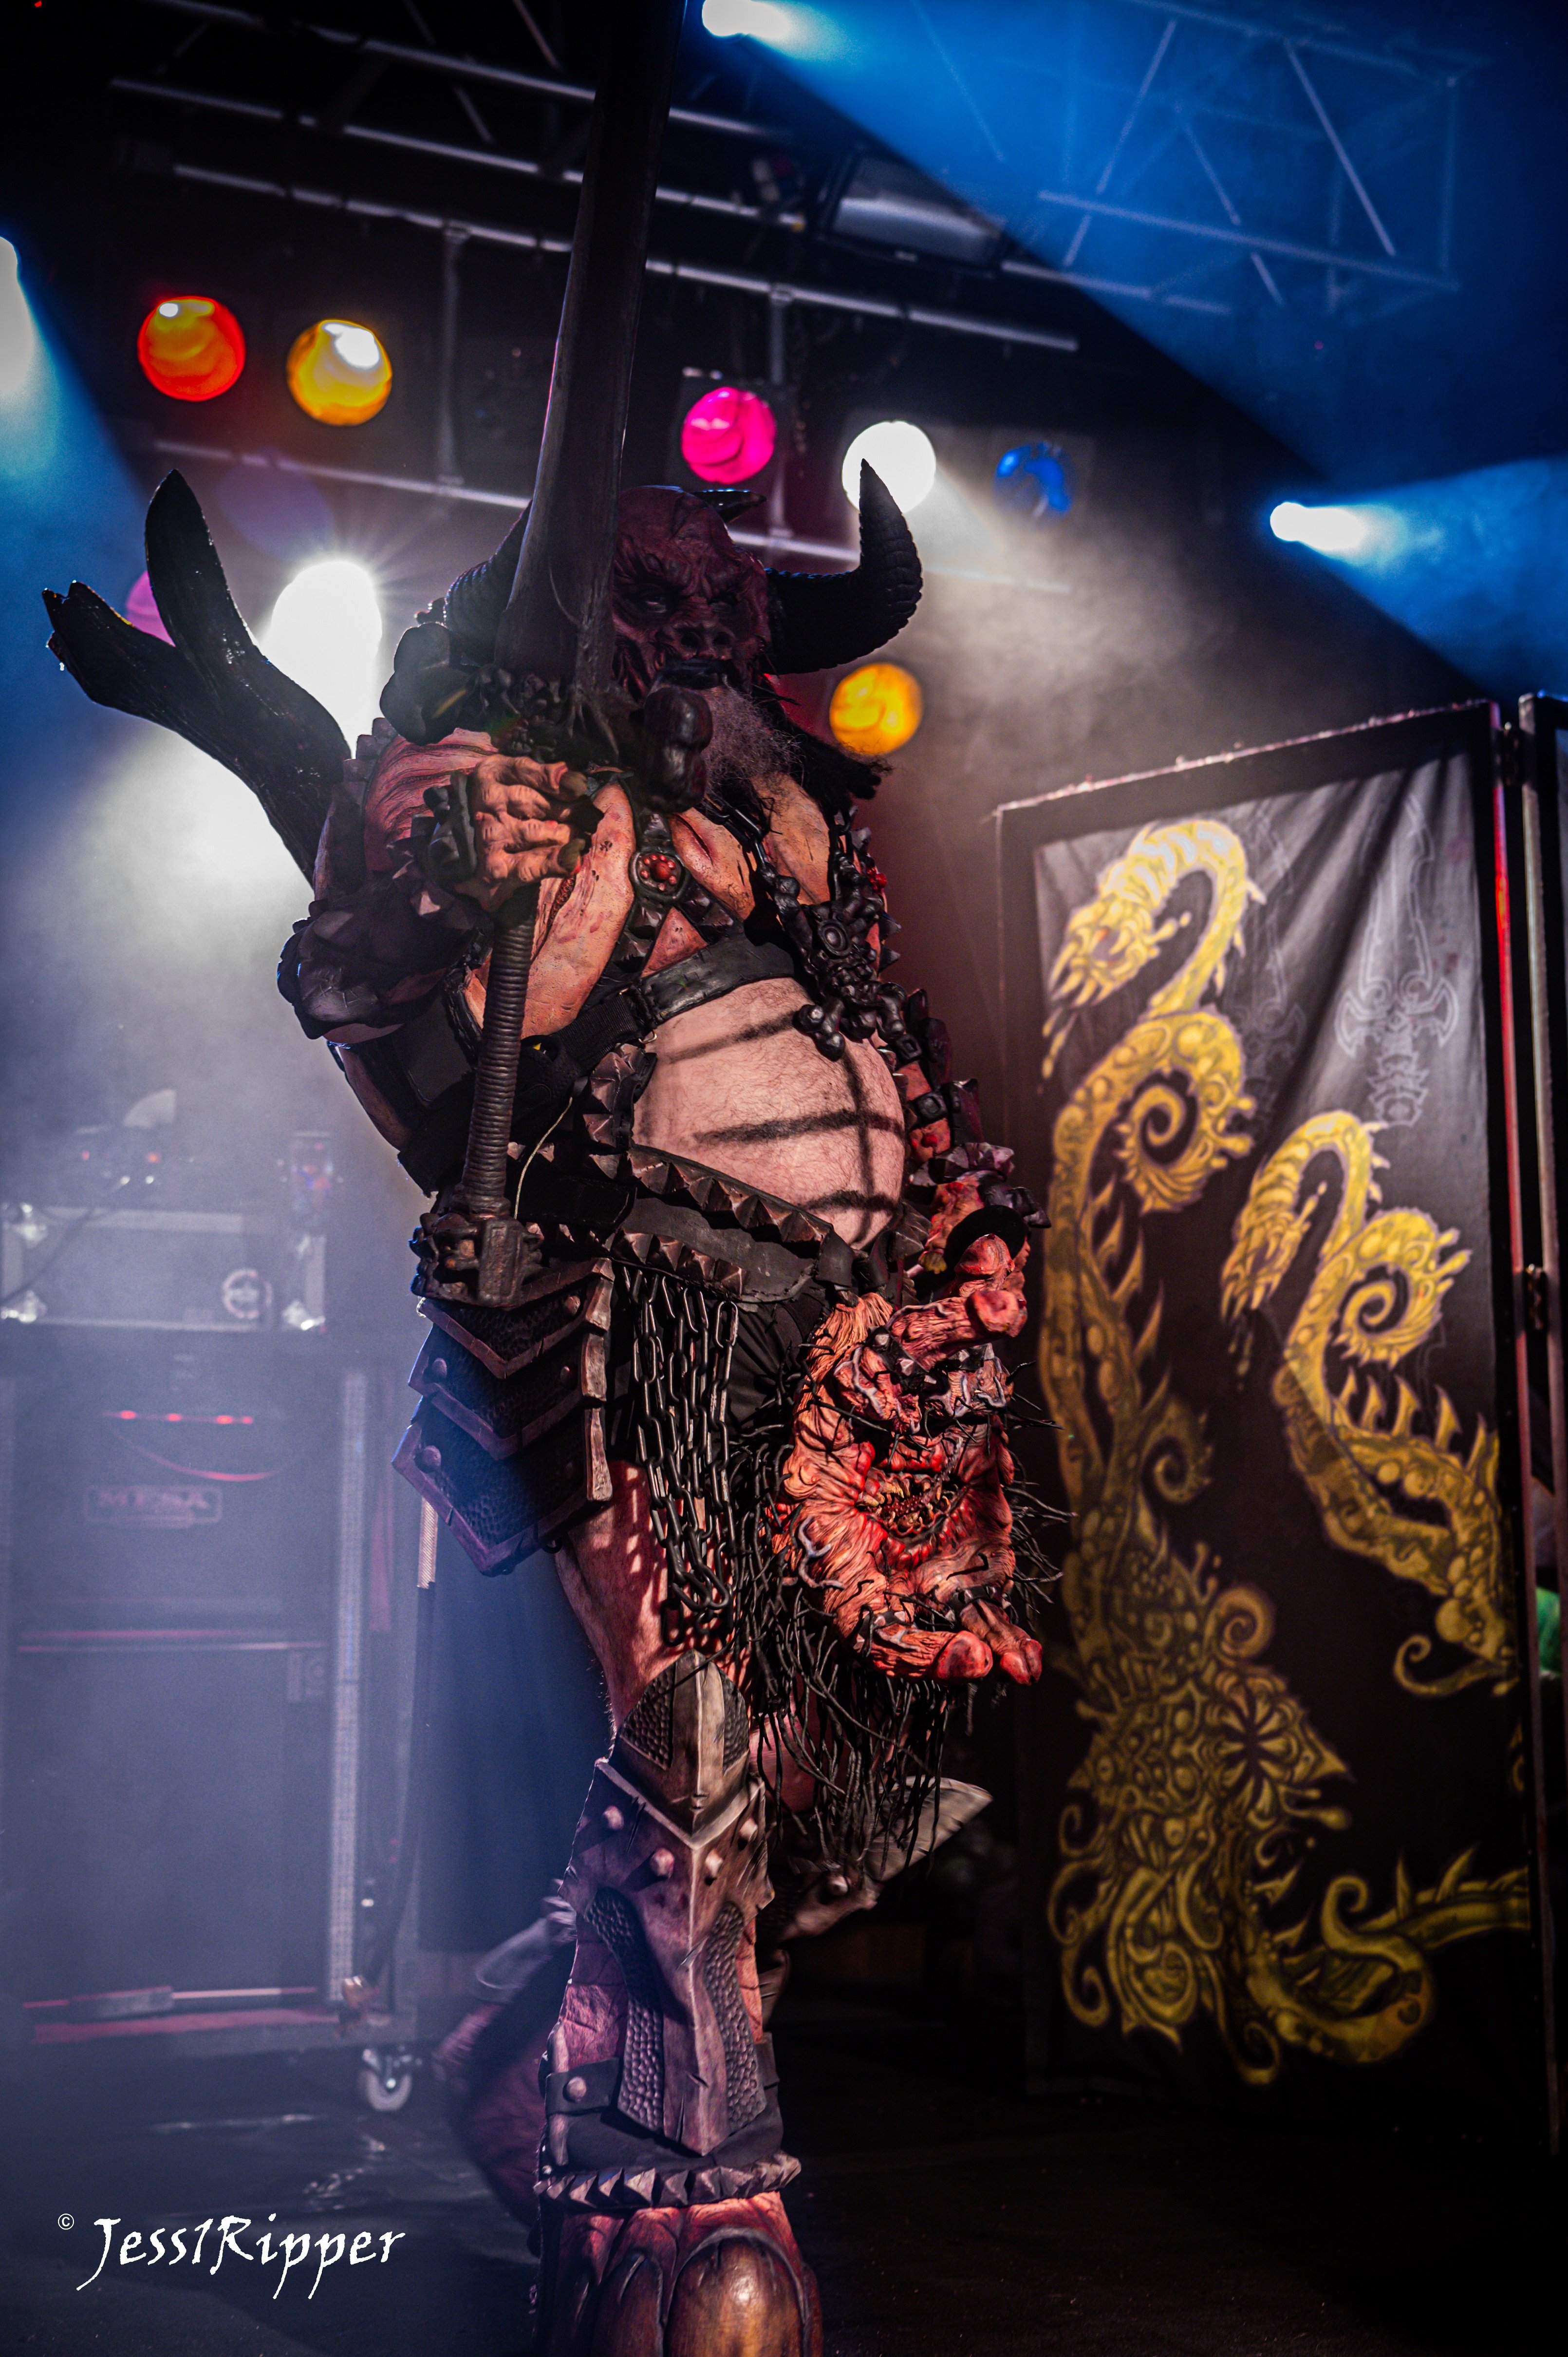 Photos: Gwar, Cancer Bats, X-Cops at the Starland Ballroom in Sayreville, New Jersey on March 6, 2024